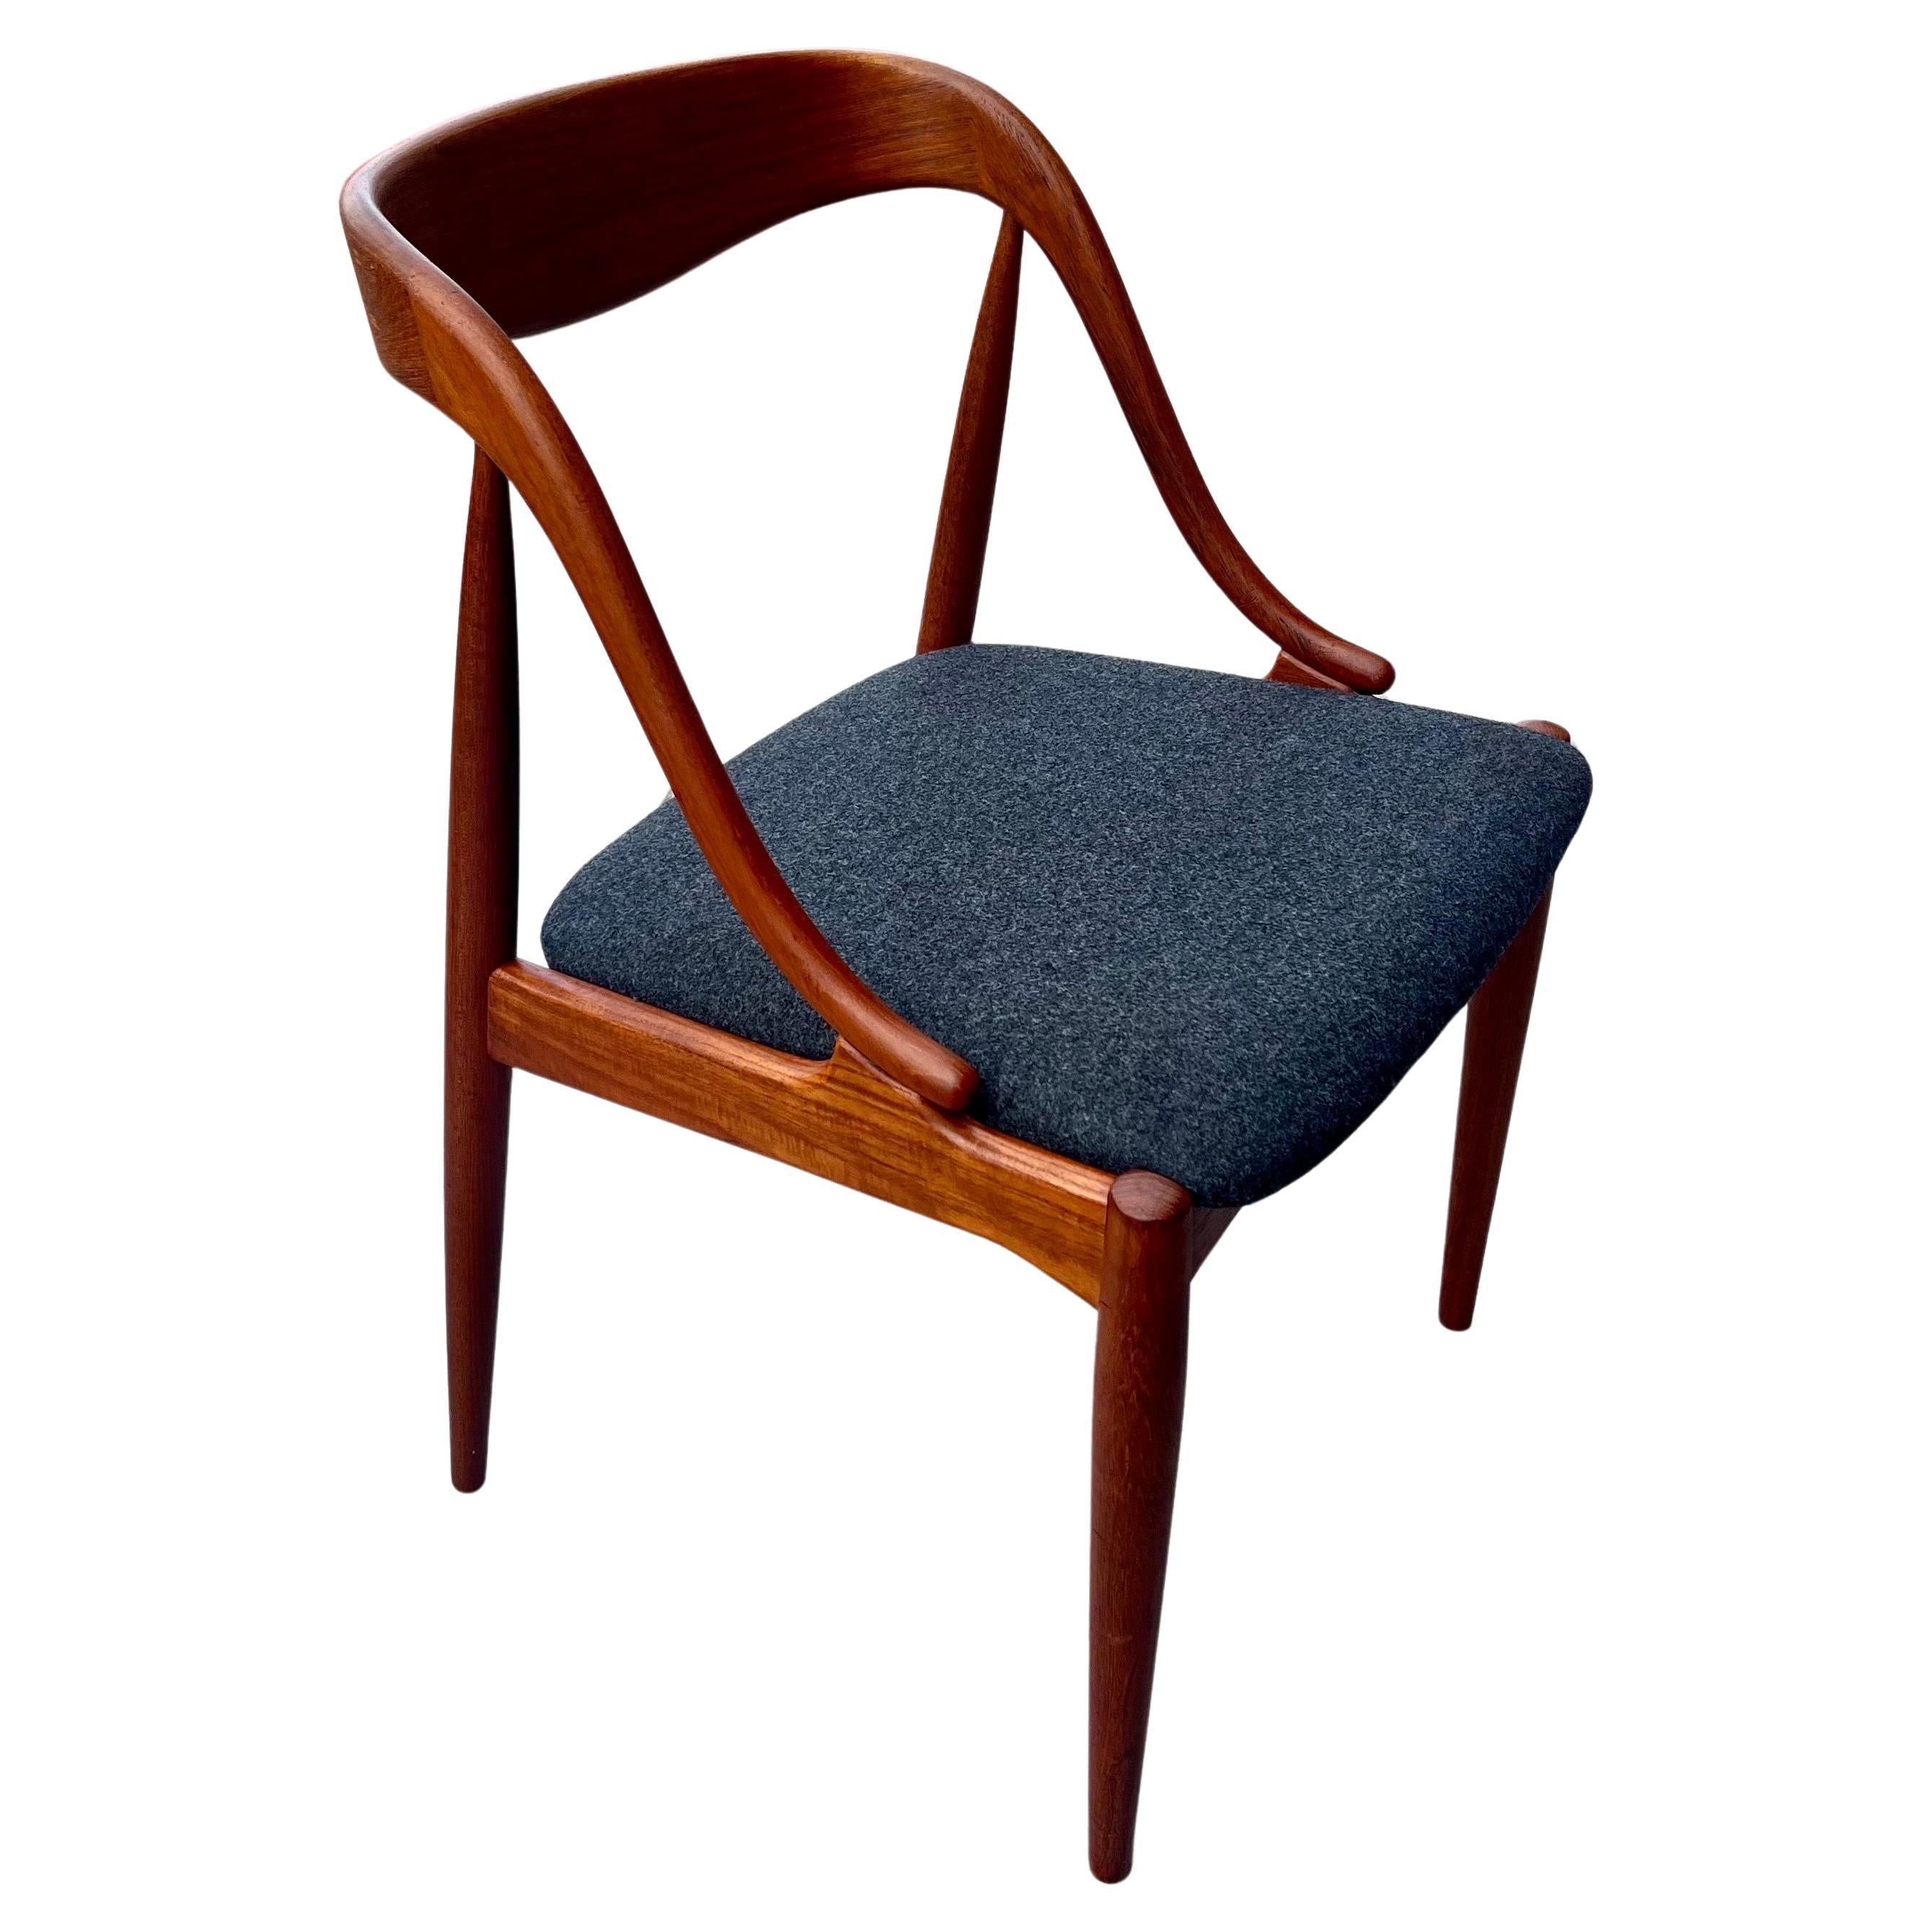 Mid-Century Danish pair of Model 16 dining chairs designed by Johannes Andersen For Uldum Møbelfabrik, 1950s, set of 4. These chair has been refinished and recover in beautiful Knoll wool fabric , this chair is solid and sturdy elegant and beautiful.